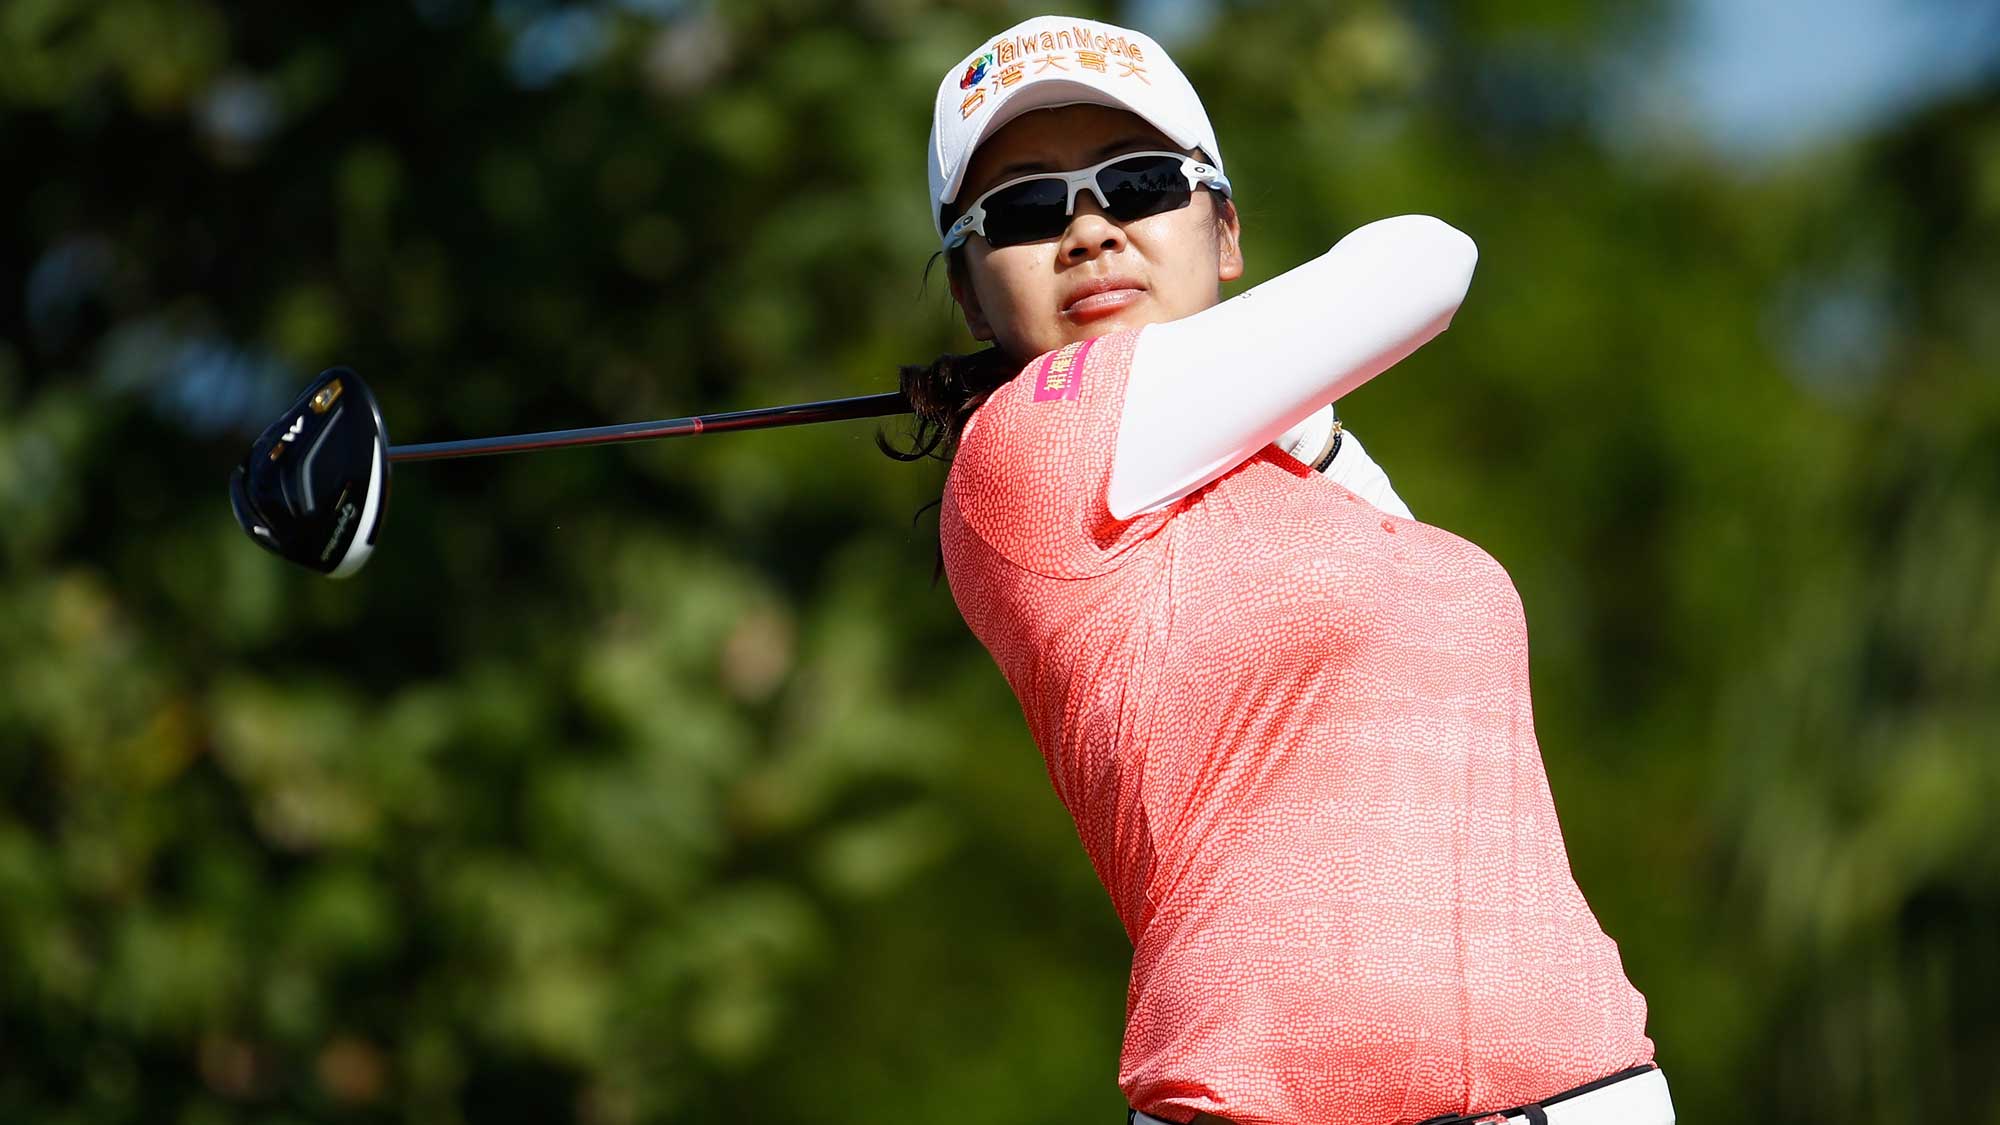 Wei-Ling Hsu of Taiwan hits her tee shot on the 4th hole during the final round of the Pure Silk Bahamas LPGA Classic